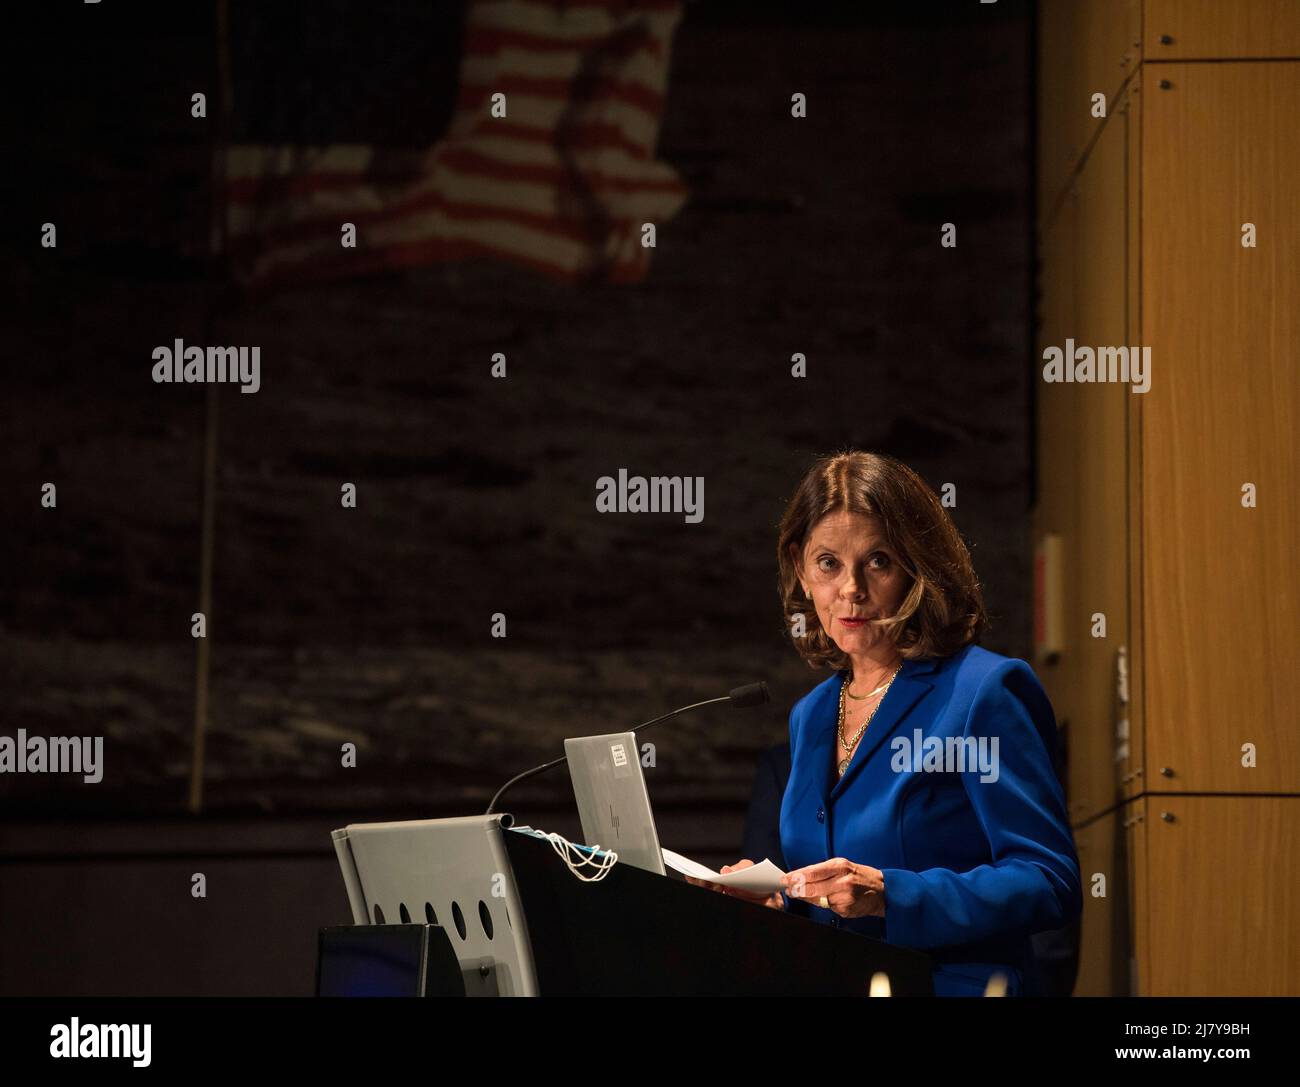 Washington, United States Of America. 10th May, 2022. Washington, United States of America. 10 May, 2022. Colombian Vice President and Foreign Minister, Marta Lucia Ramirez, delivers remarks before signing the Artemis Accords, at the NASA Headquarters Mary W. Jackson Building, May 10, 2022 in Washington, DC, USA. Colombia is the nineteenth country to sign the Artemis Accords, which establish a practical set of principles to guide space exploration cooperation among nations participating in the NASA Artemis program. Credit: Aubrey Gemignani/NASA/Alamy Live News Stock Photo